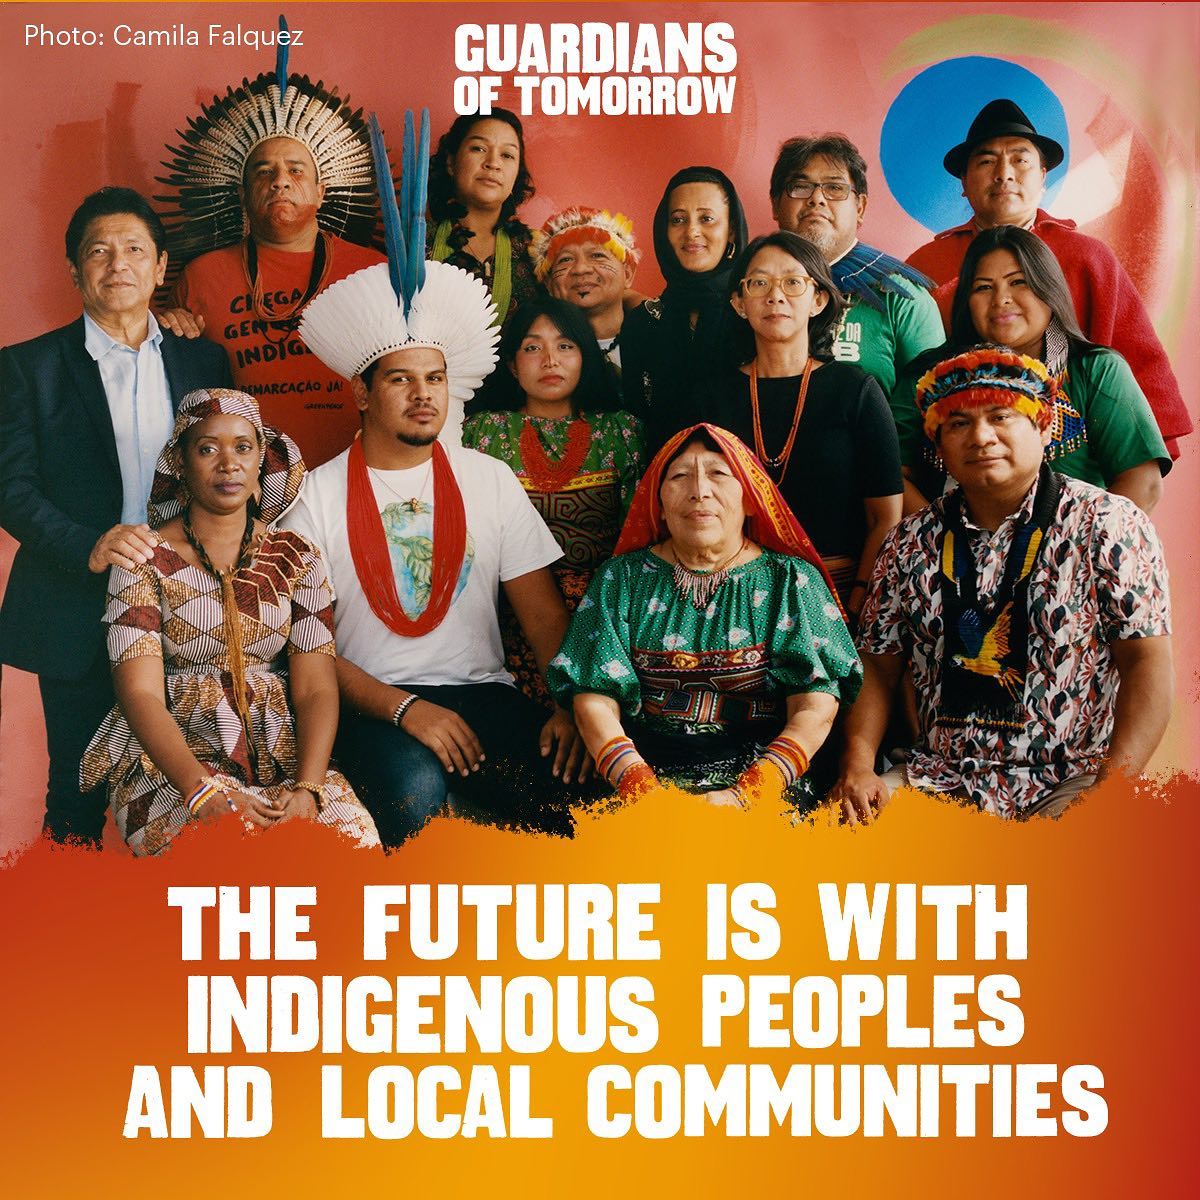 Acknowledging the fundamental work of Indigenous peoples and local communities in protecting the Earth. They keep hope alive for a bright future. Despite all odds and threats, science has proven that they are the most effective #GuardiansOfTomorrow. They need more support to defend their rights and lands. They have and are still putting themselves on the frontlines to tackle the climate crisis. Let Indigenous peoples and local communities lead. Follow @globalalliancet to learn more.????: @camilafalquez